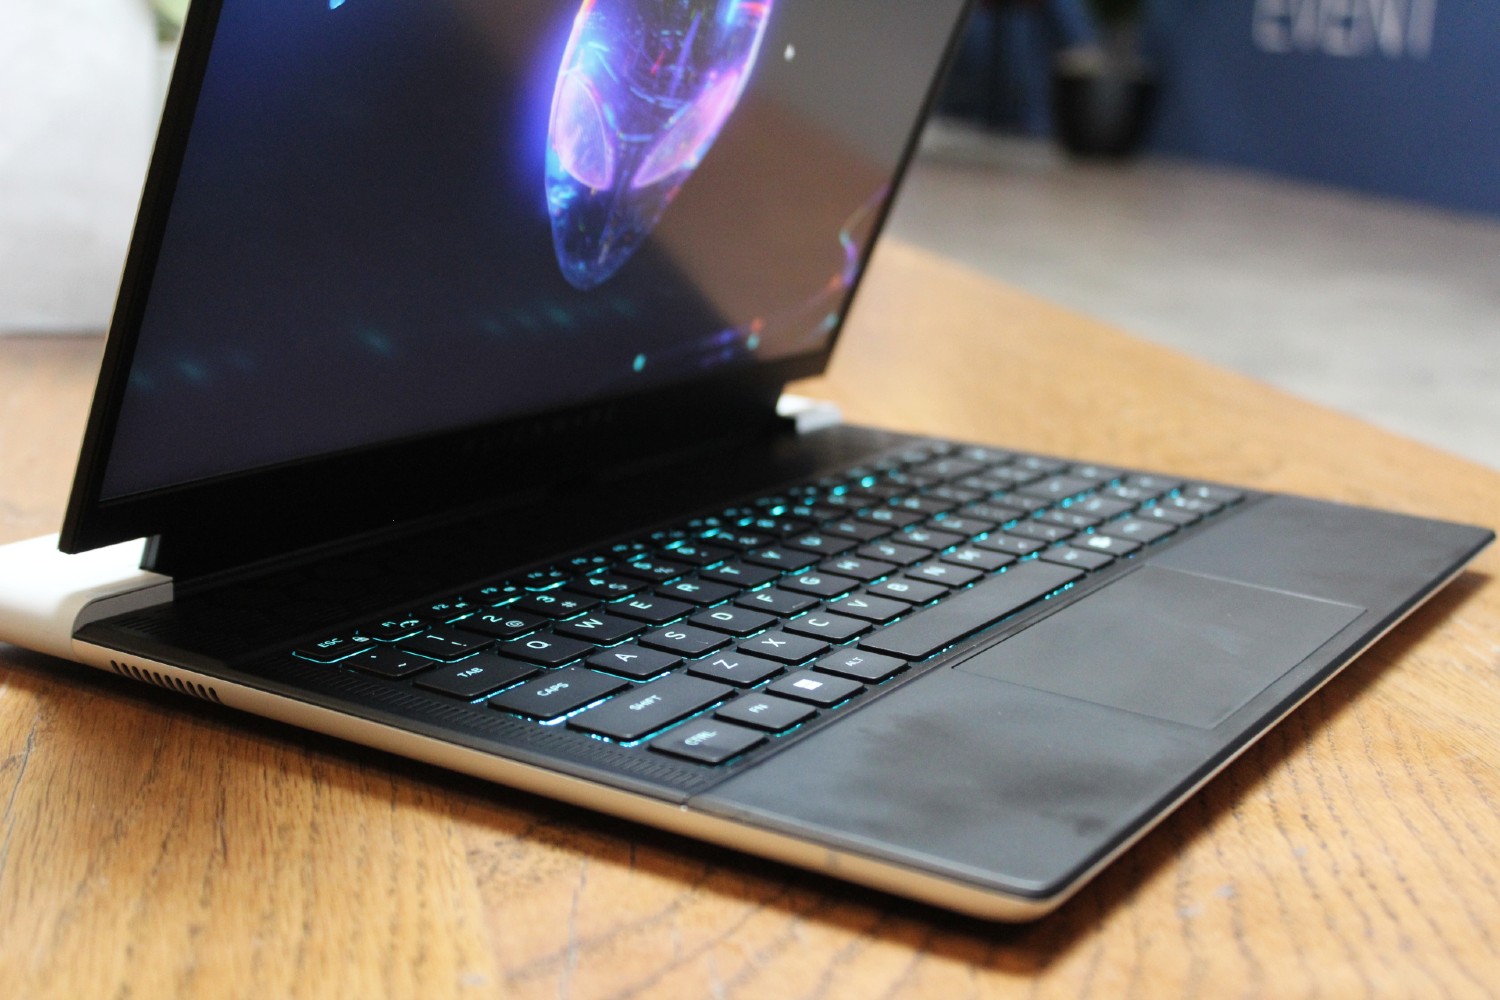 Alienware x14 R2 at a side angle.